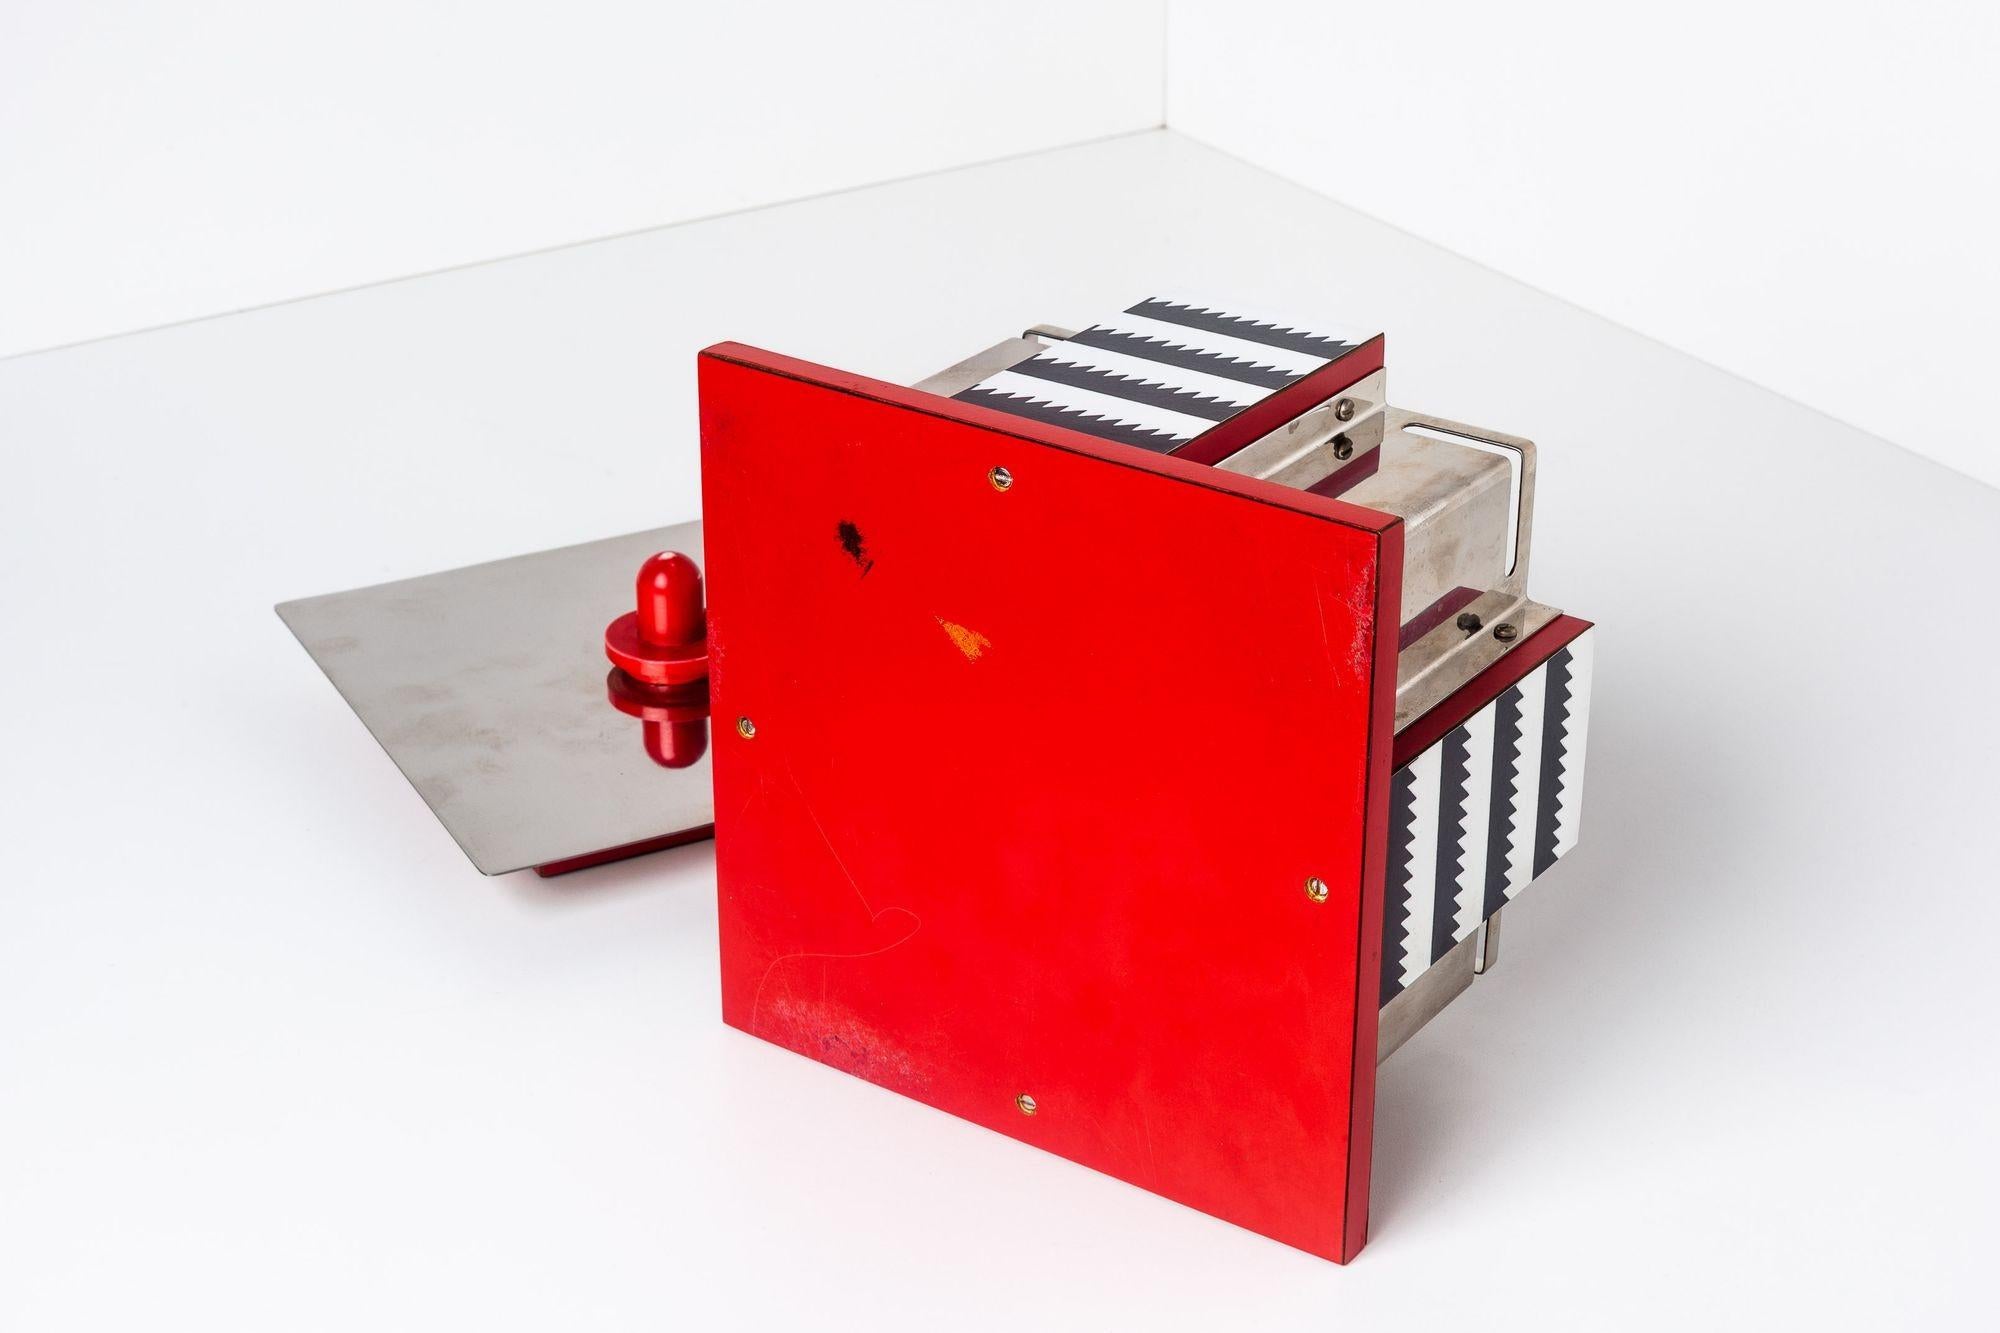 Stainless Steel Nathalie Du Pasquier Gravieux Accueil Box from Objects for the Electronic Age For Sale